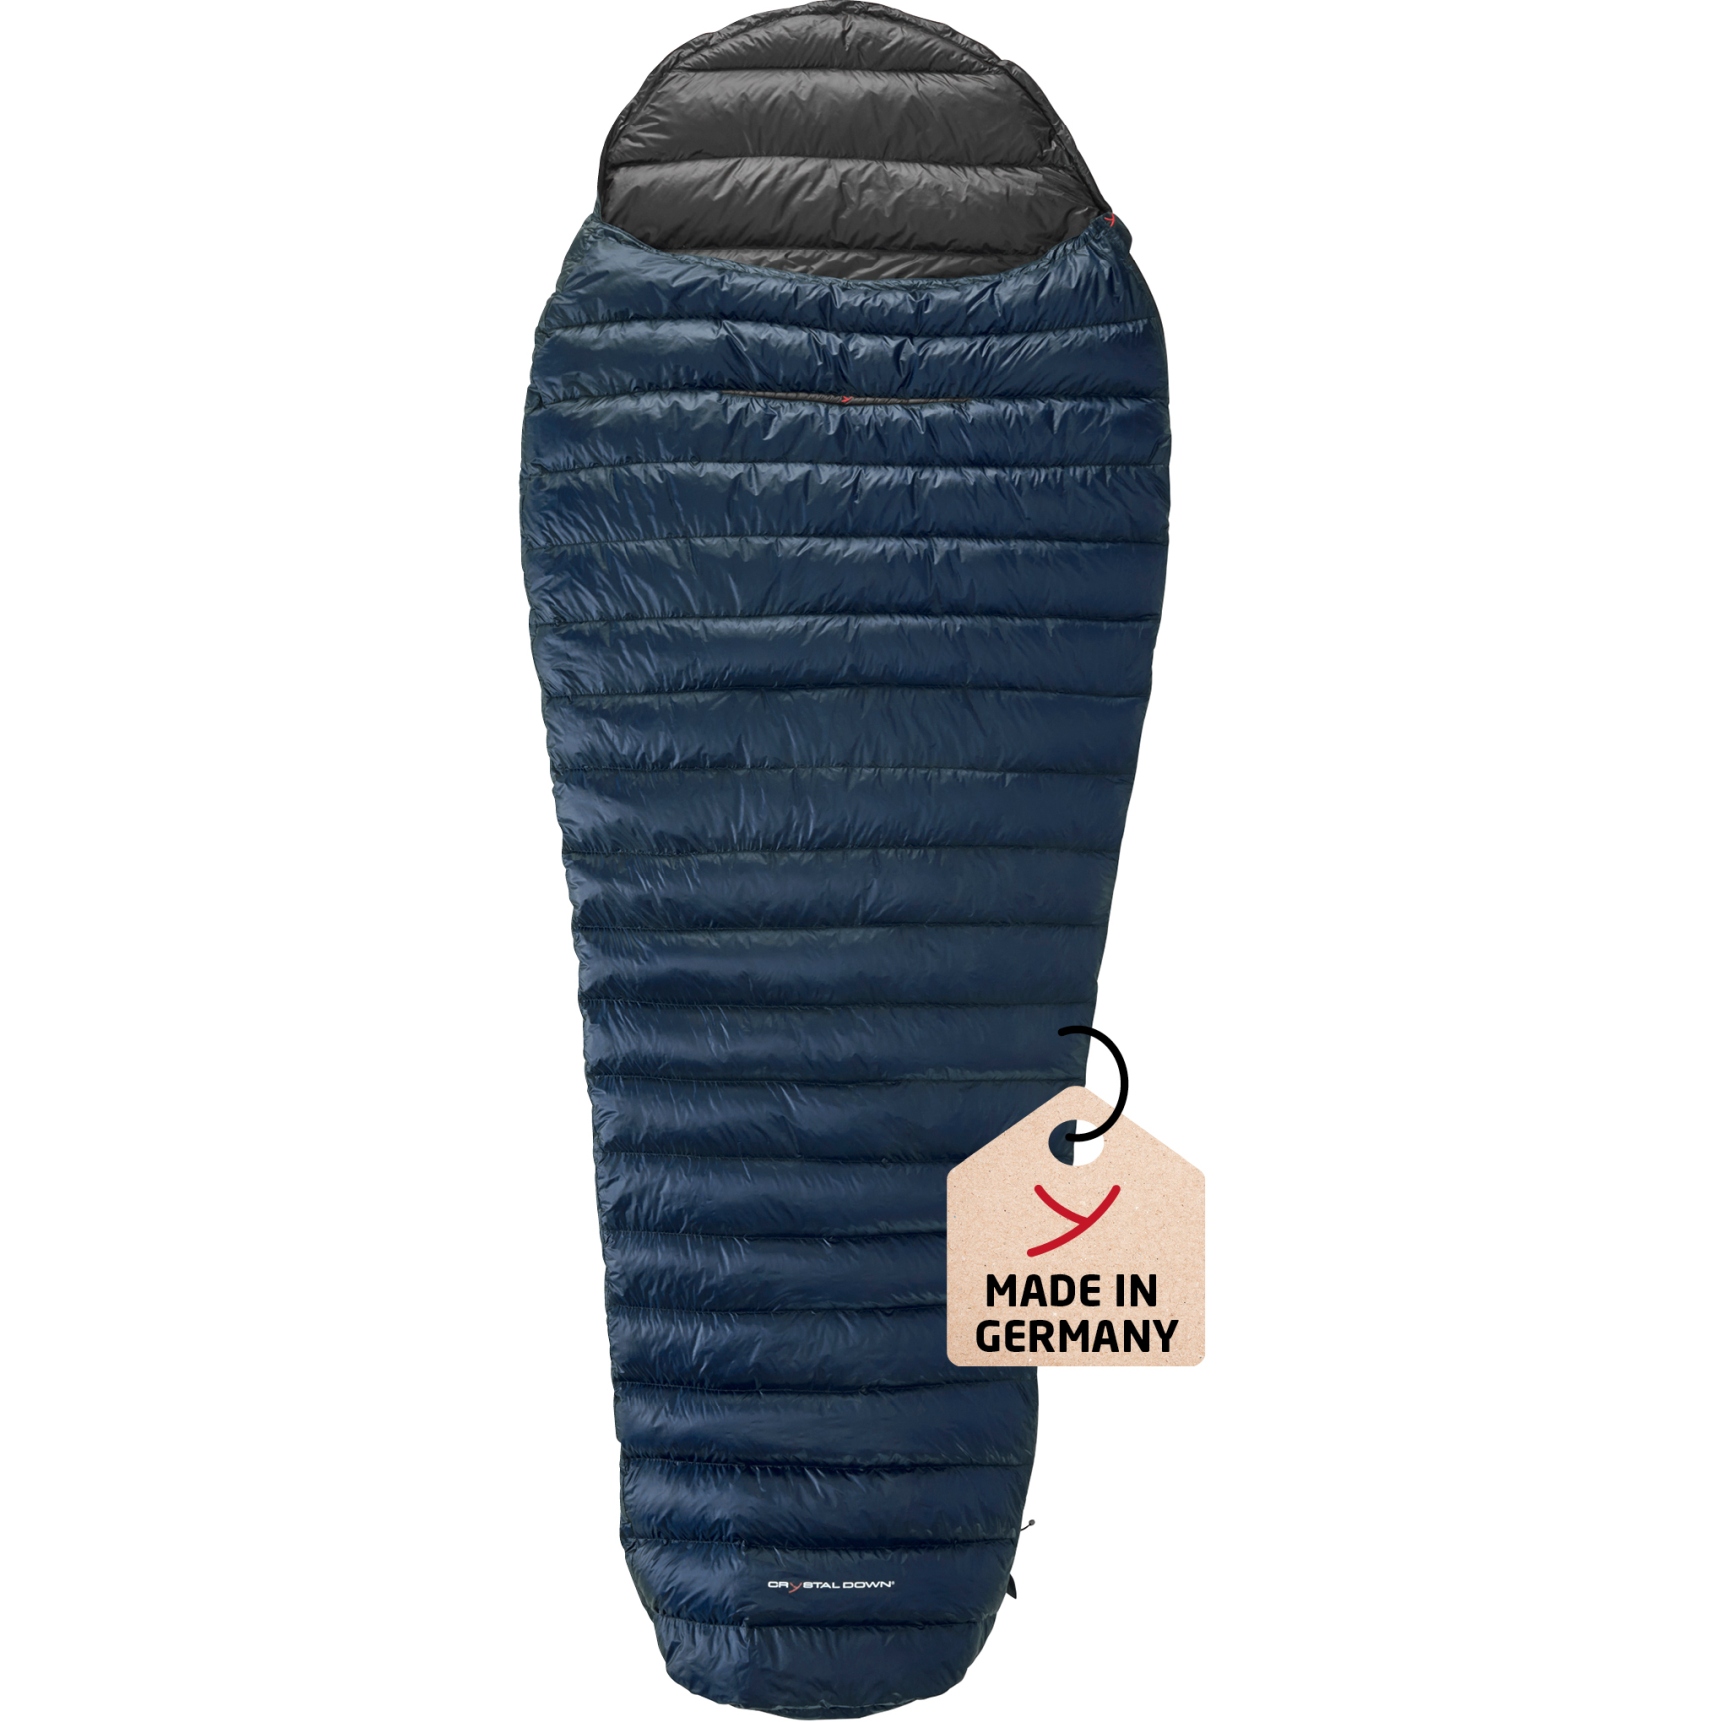 Picture of Y by Nordisk Passion One L Sleeping Bag - mood indigo/black